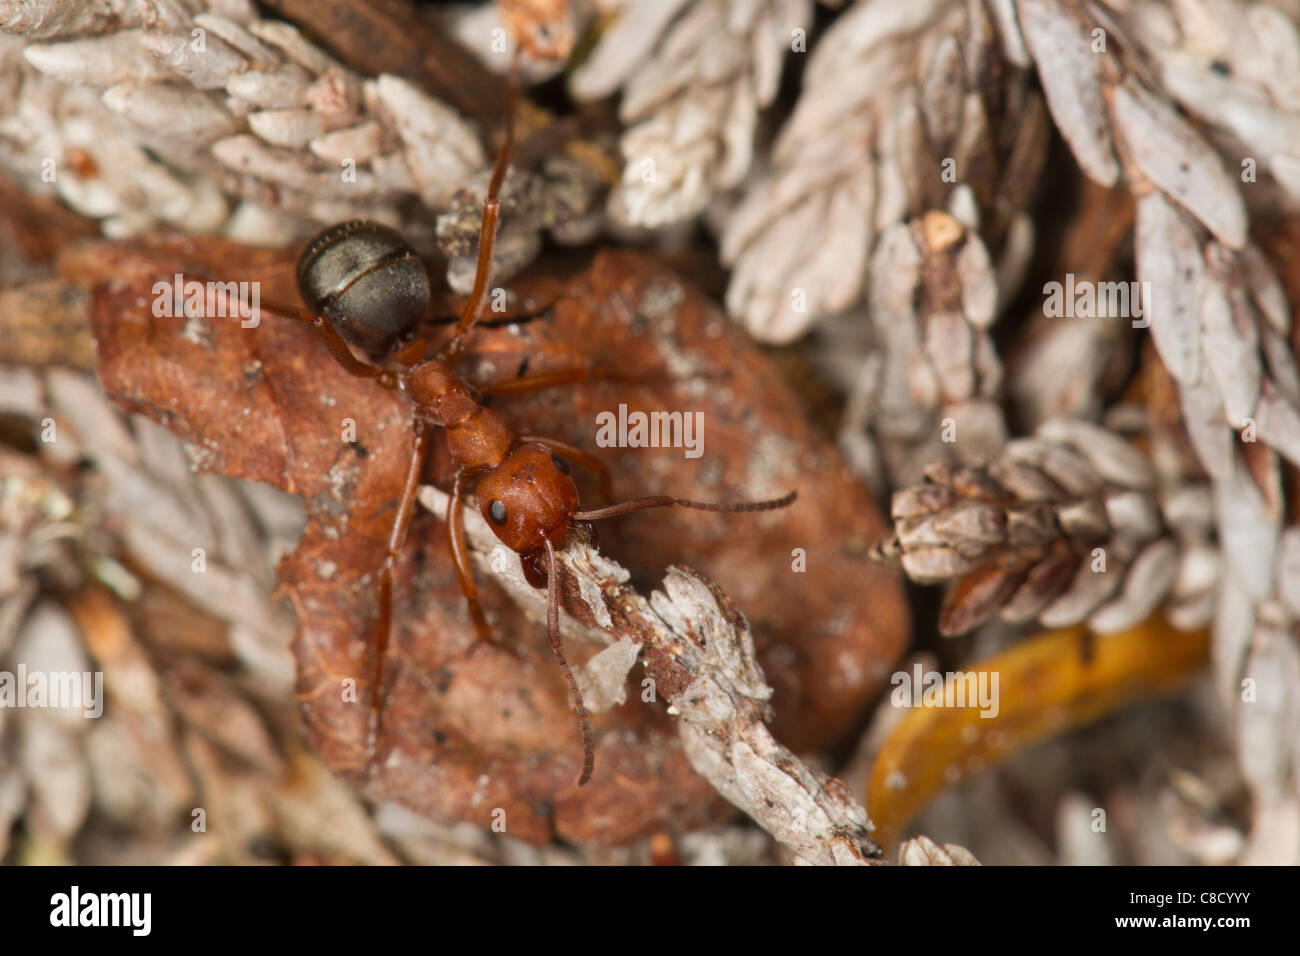 Red Wood Ant (Formica obscuriventris) carrying a pine needle on its nest Stock Photo